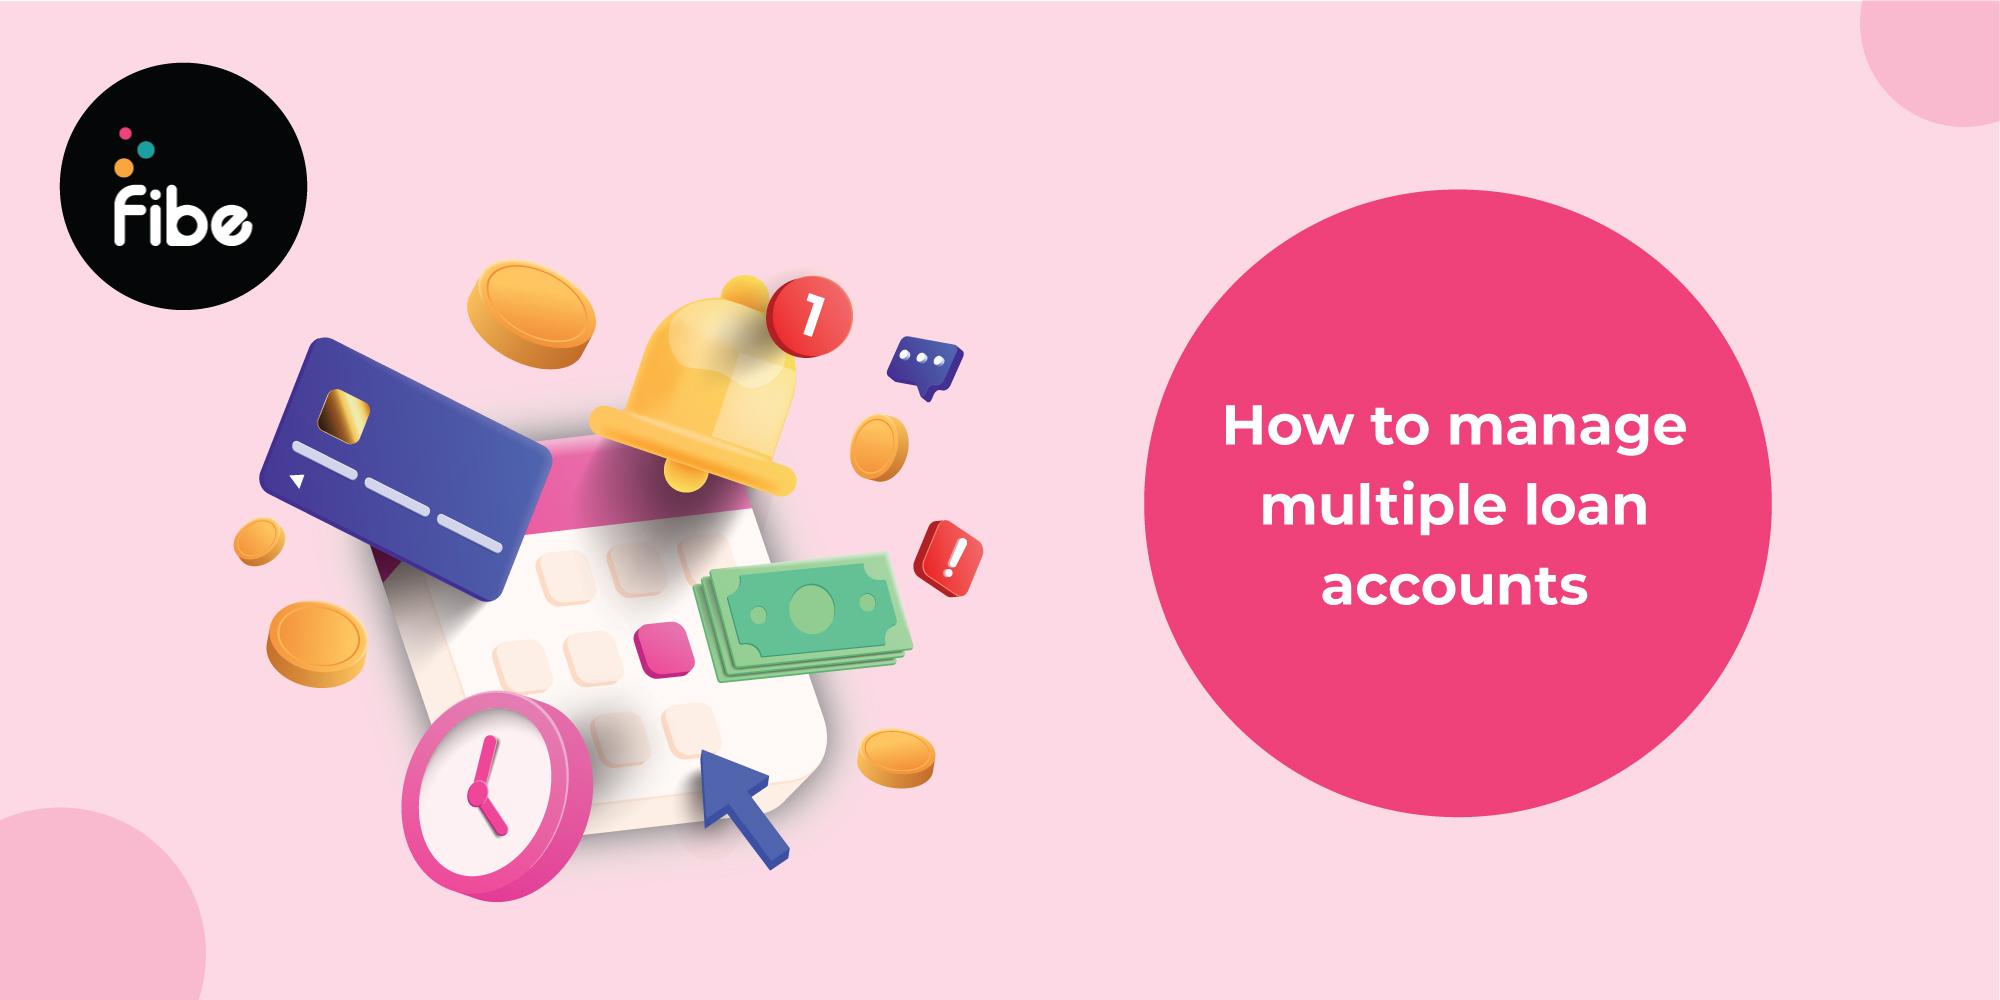 4 Smart Tips to Manage Multiple Loan Accounts Effectively